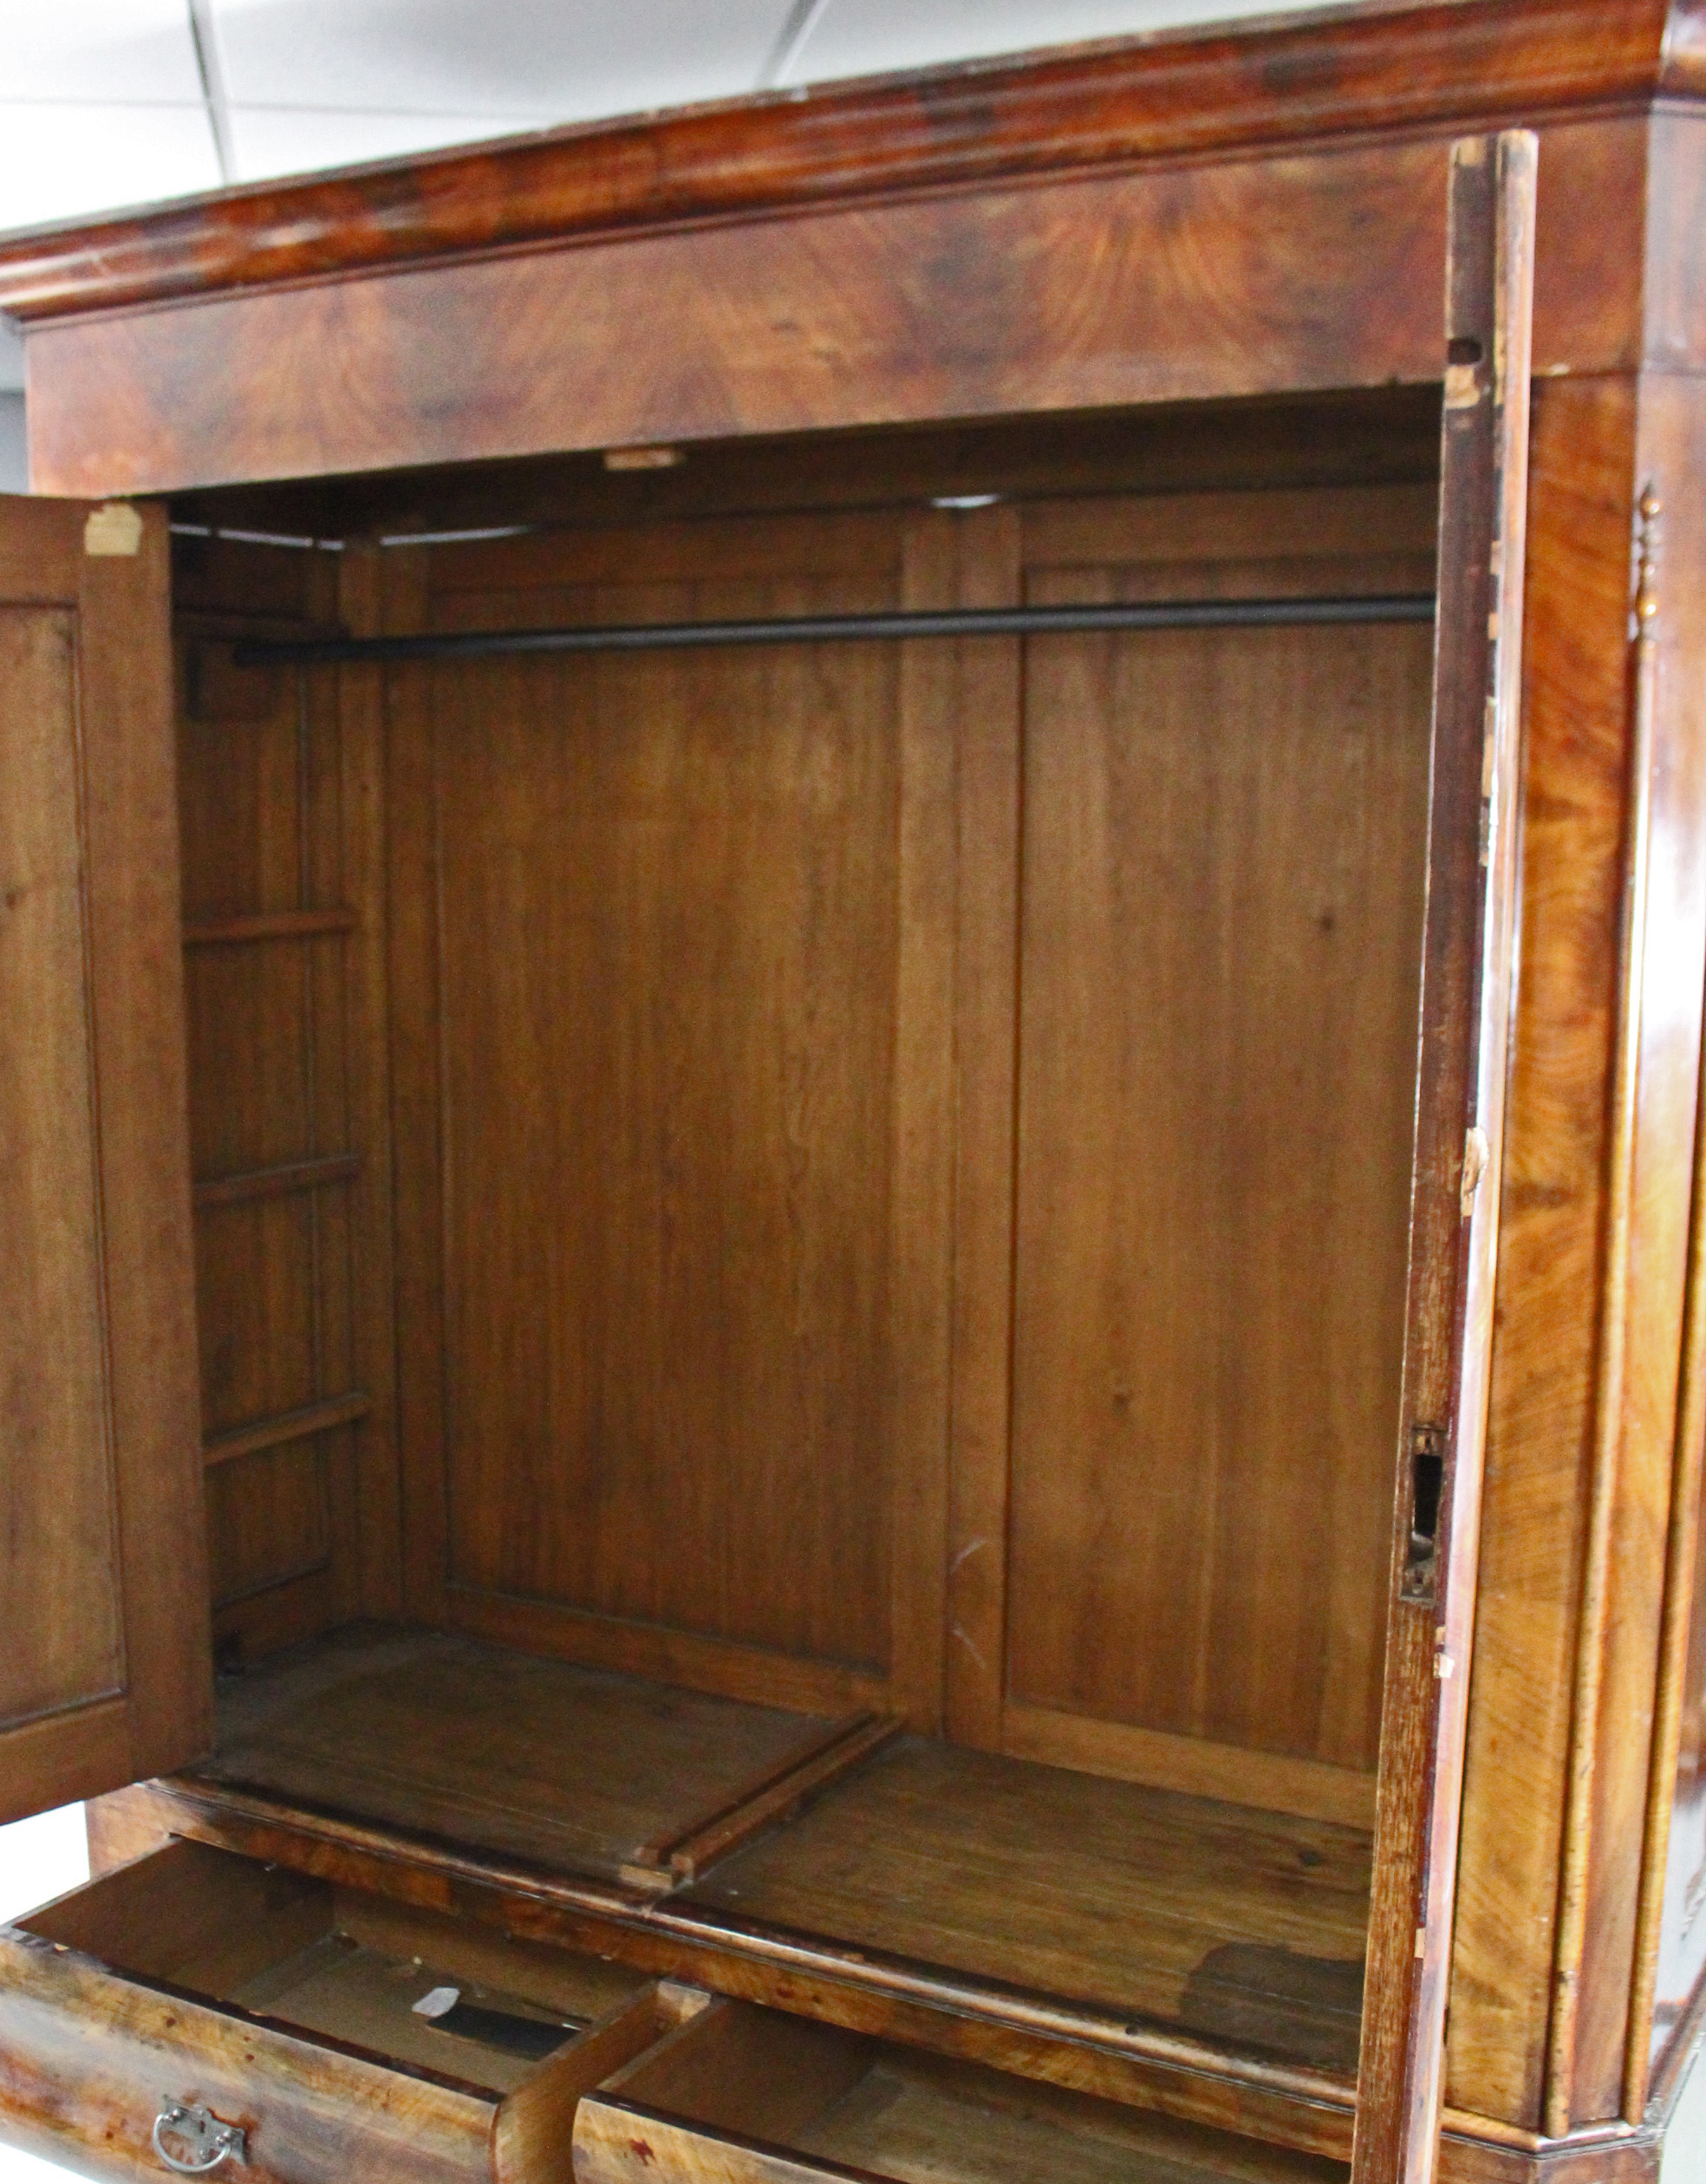 A 19th century CONTINENTAL FIGURED MAHOGANY WARDROBE, the upper part with cavetto cornice & enclosed - Image 3 of 3